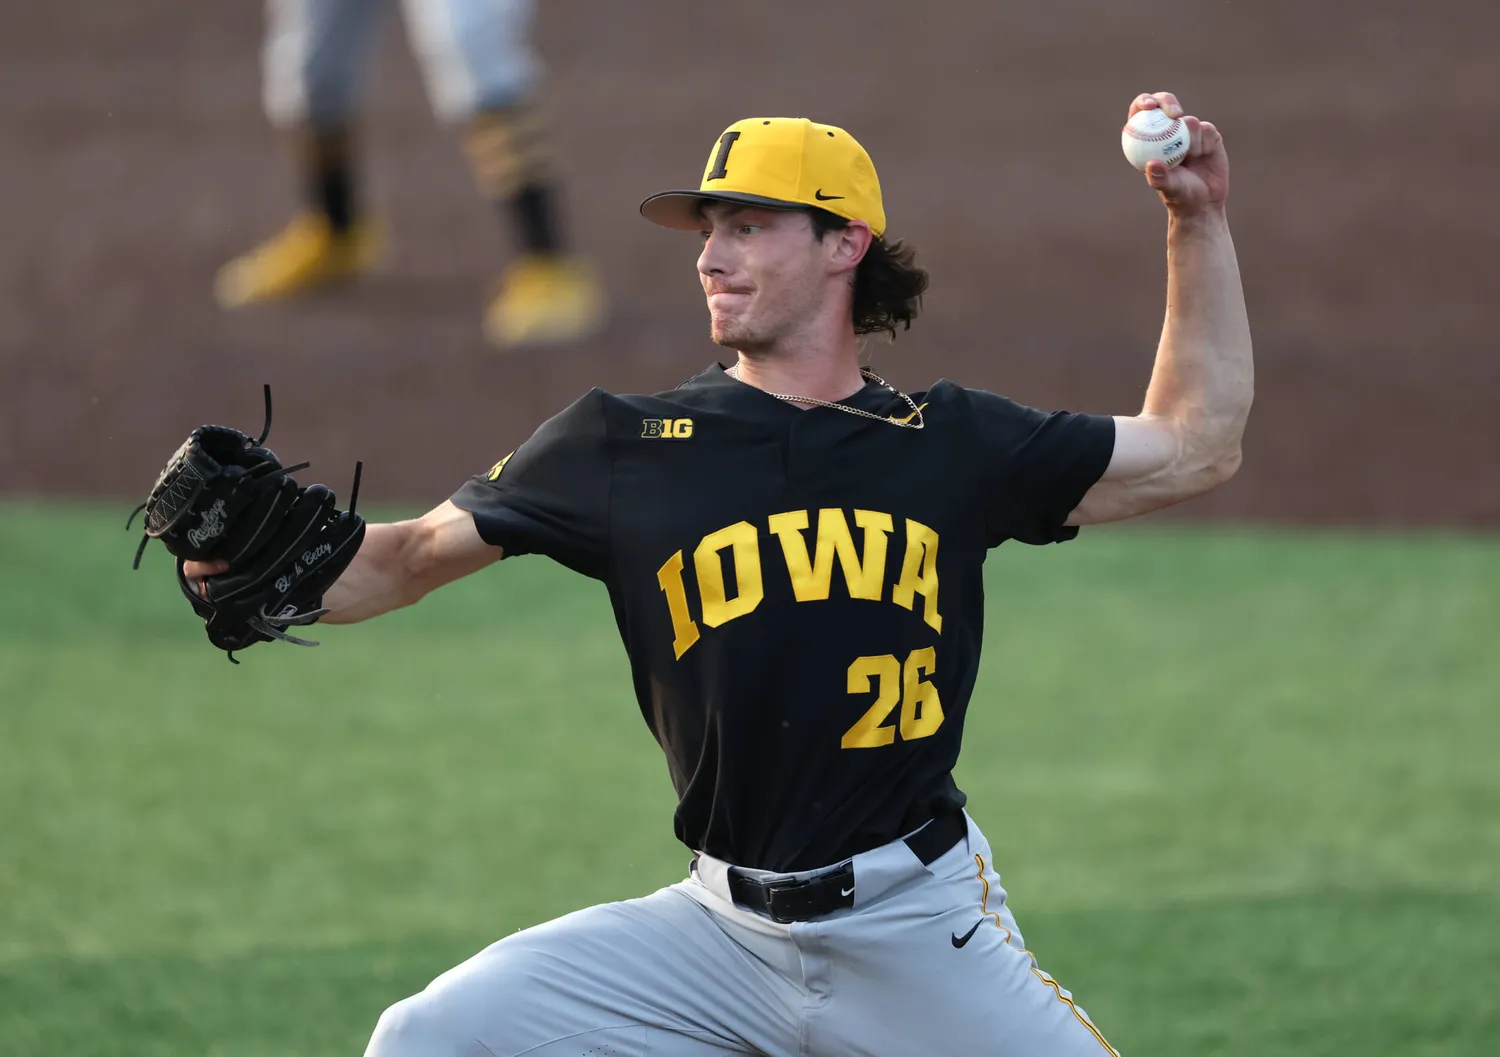 HAWKEYES FALL TO INDIANA STATE, 7-4